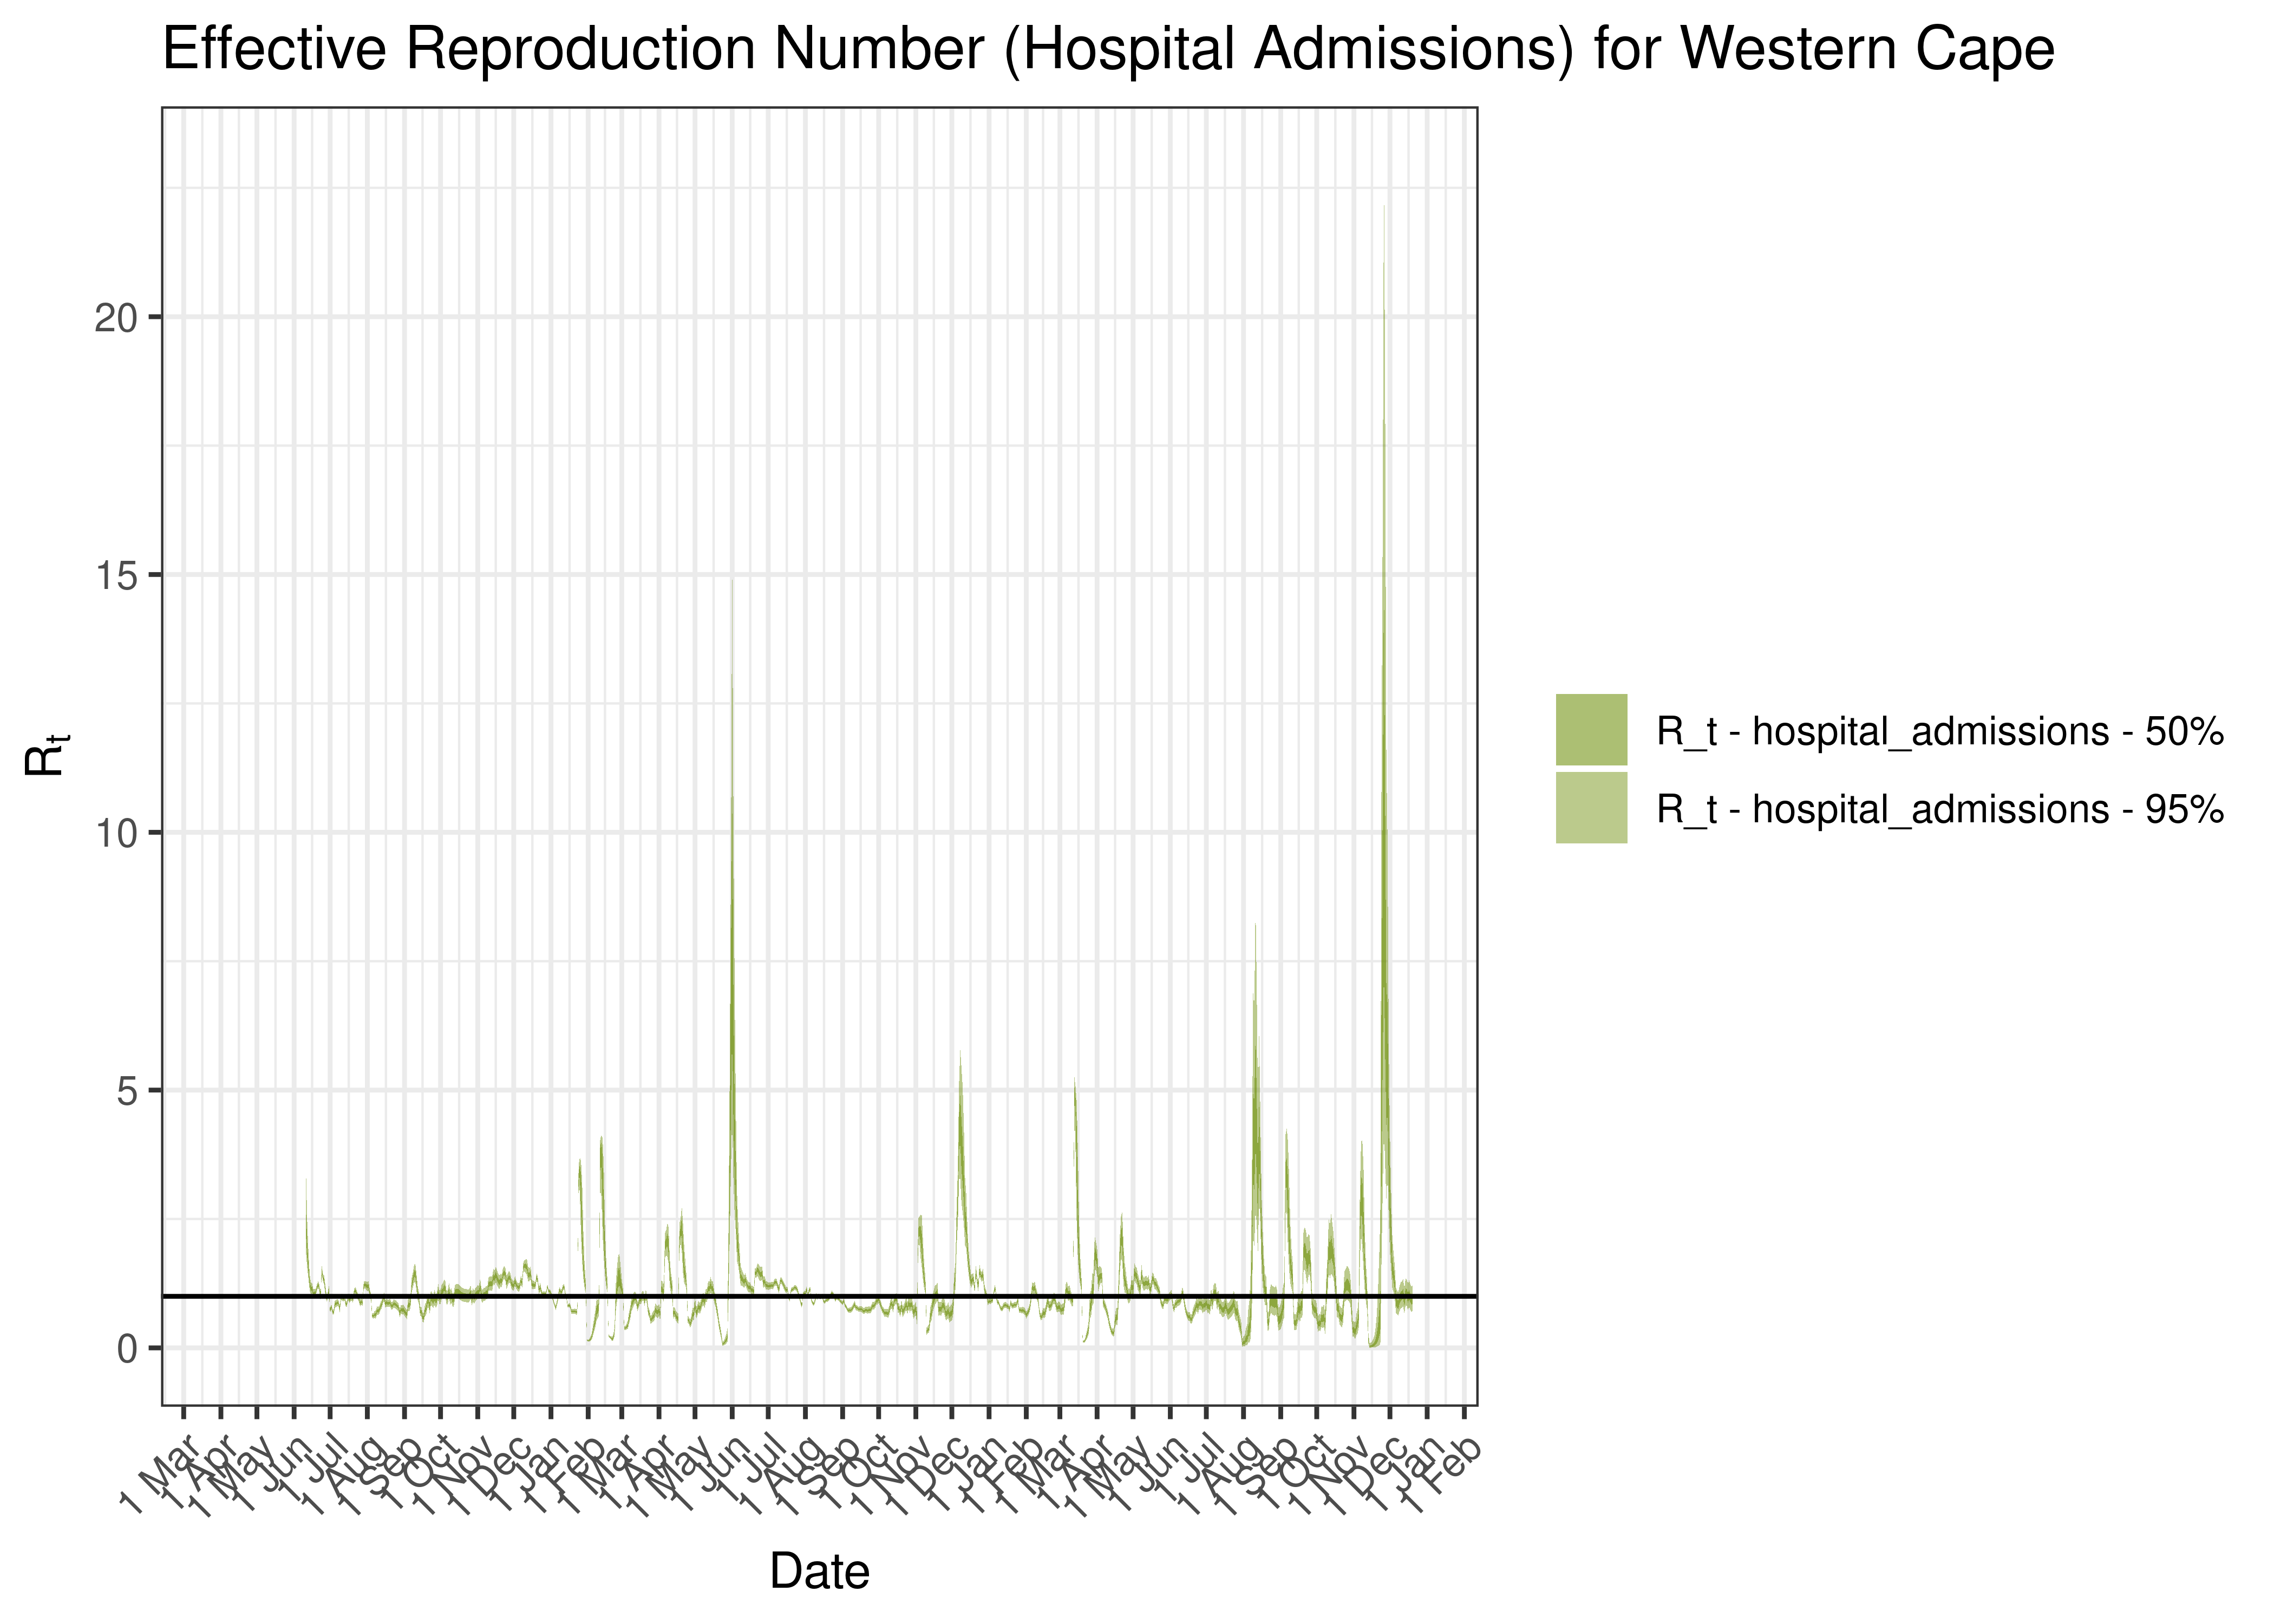 Estimated Effective Reproduction Number Based on Hospital Admissions for Western Cape since 1 April 2020